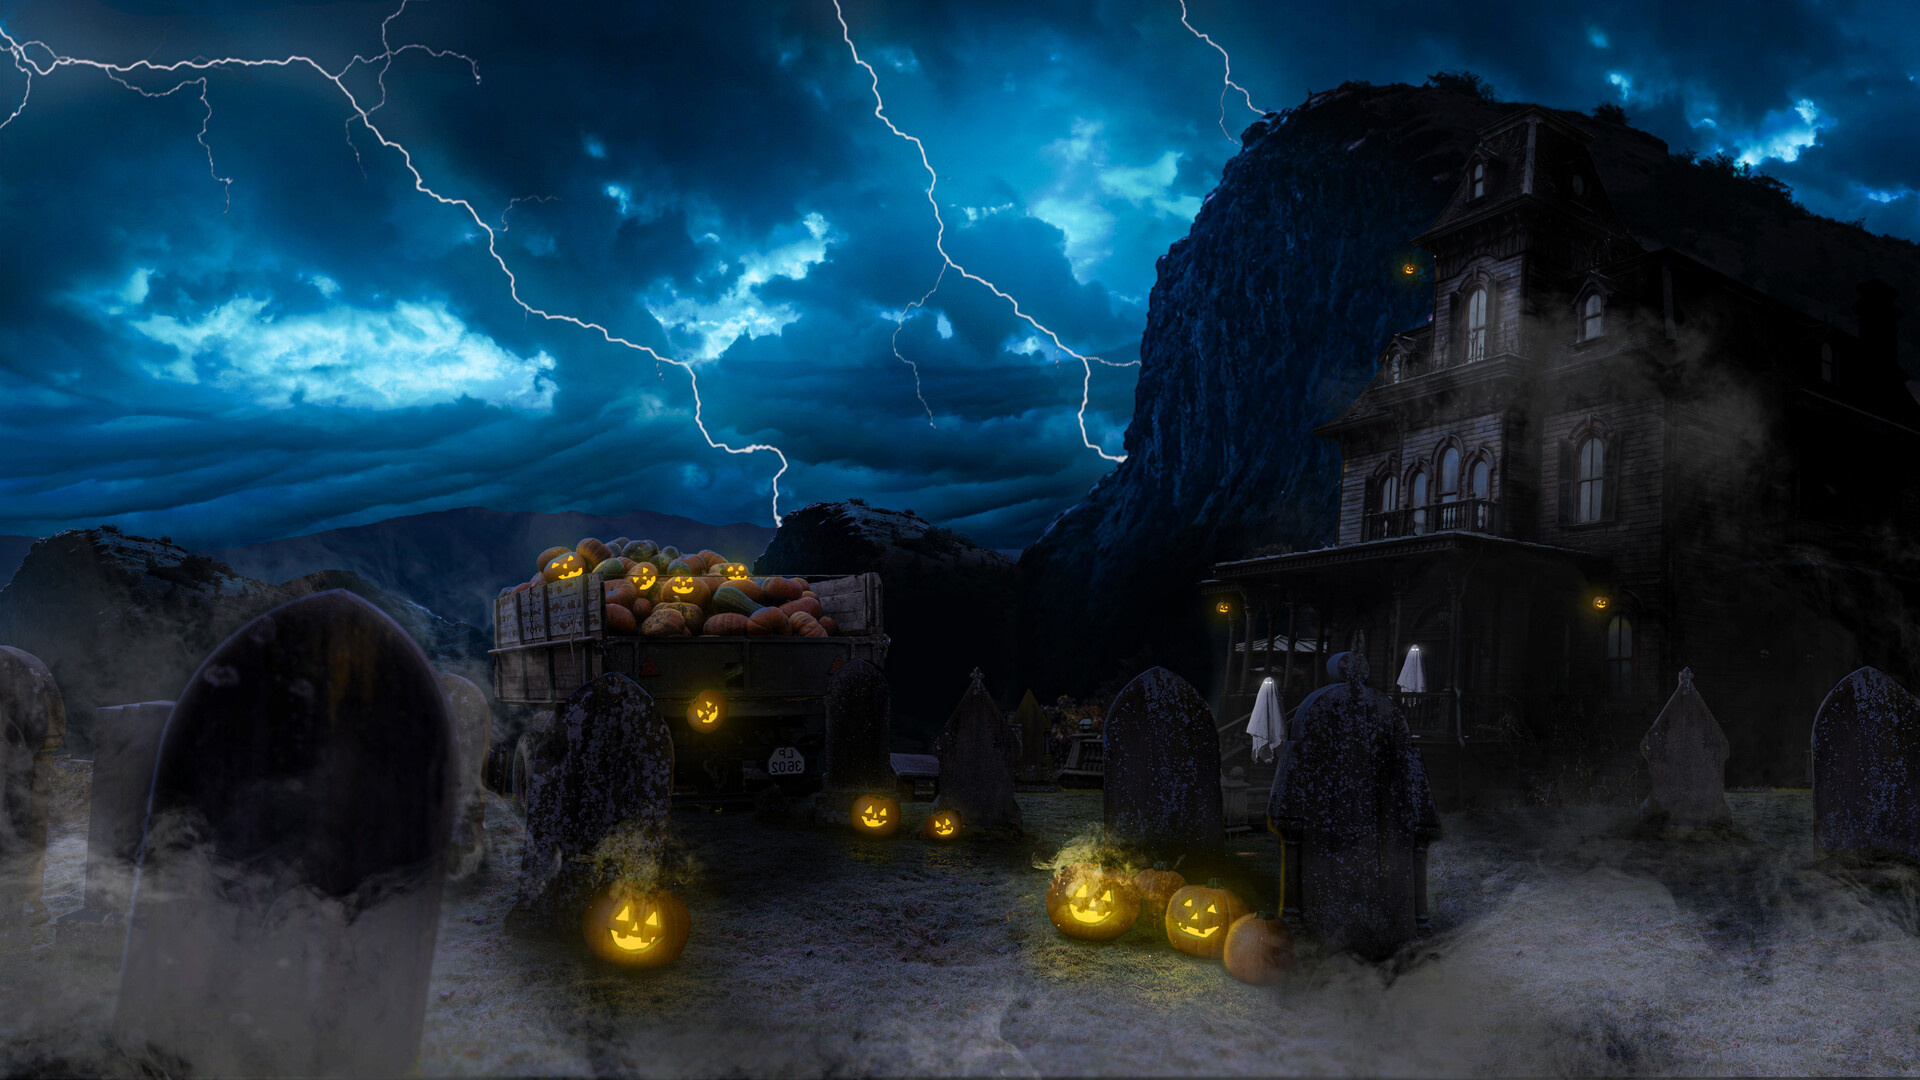 Halloween haunted house, Artistic representation, Spine-chilling visuals, Ghostly presence, 1920x1080 Full HD Desktop